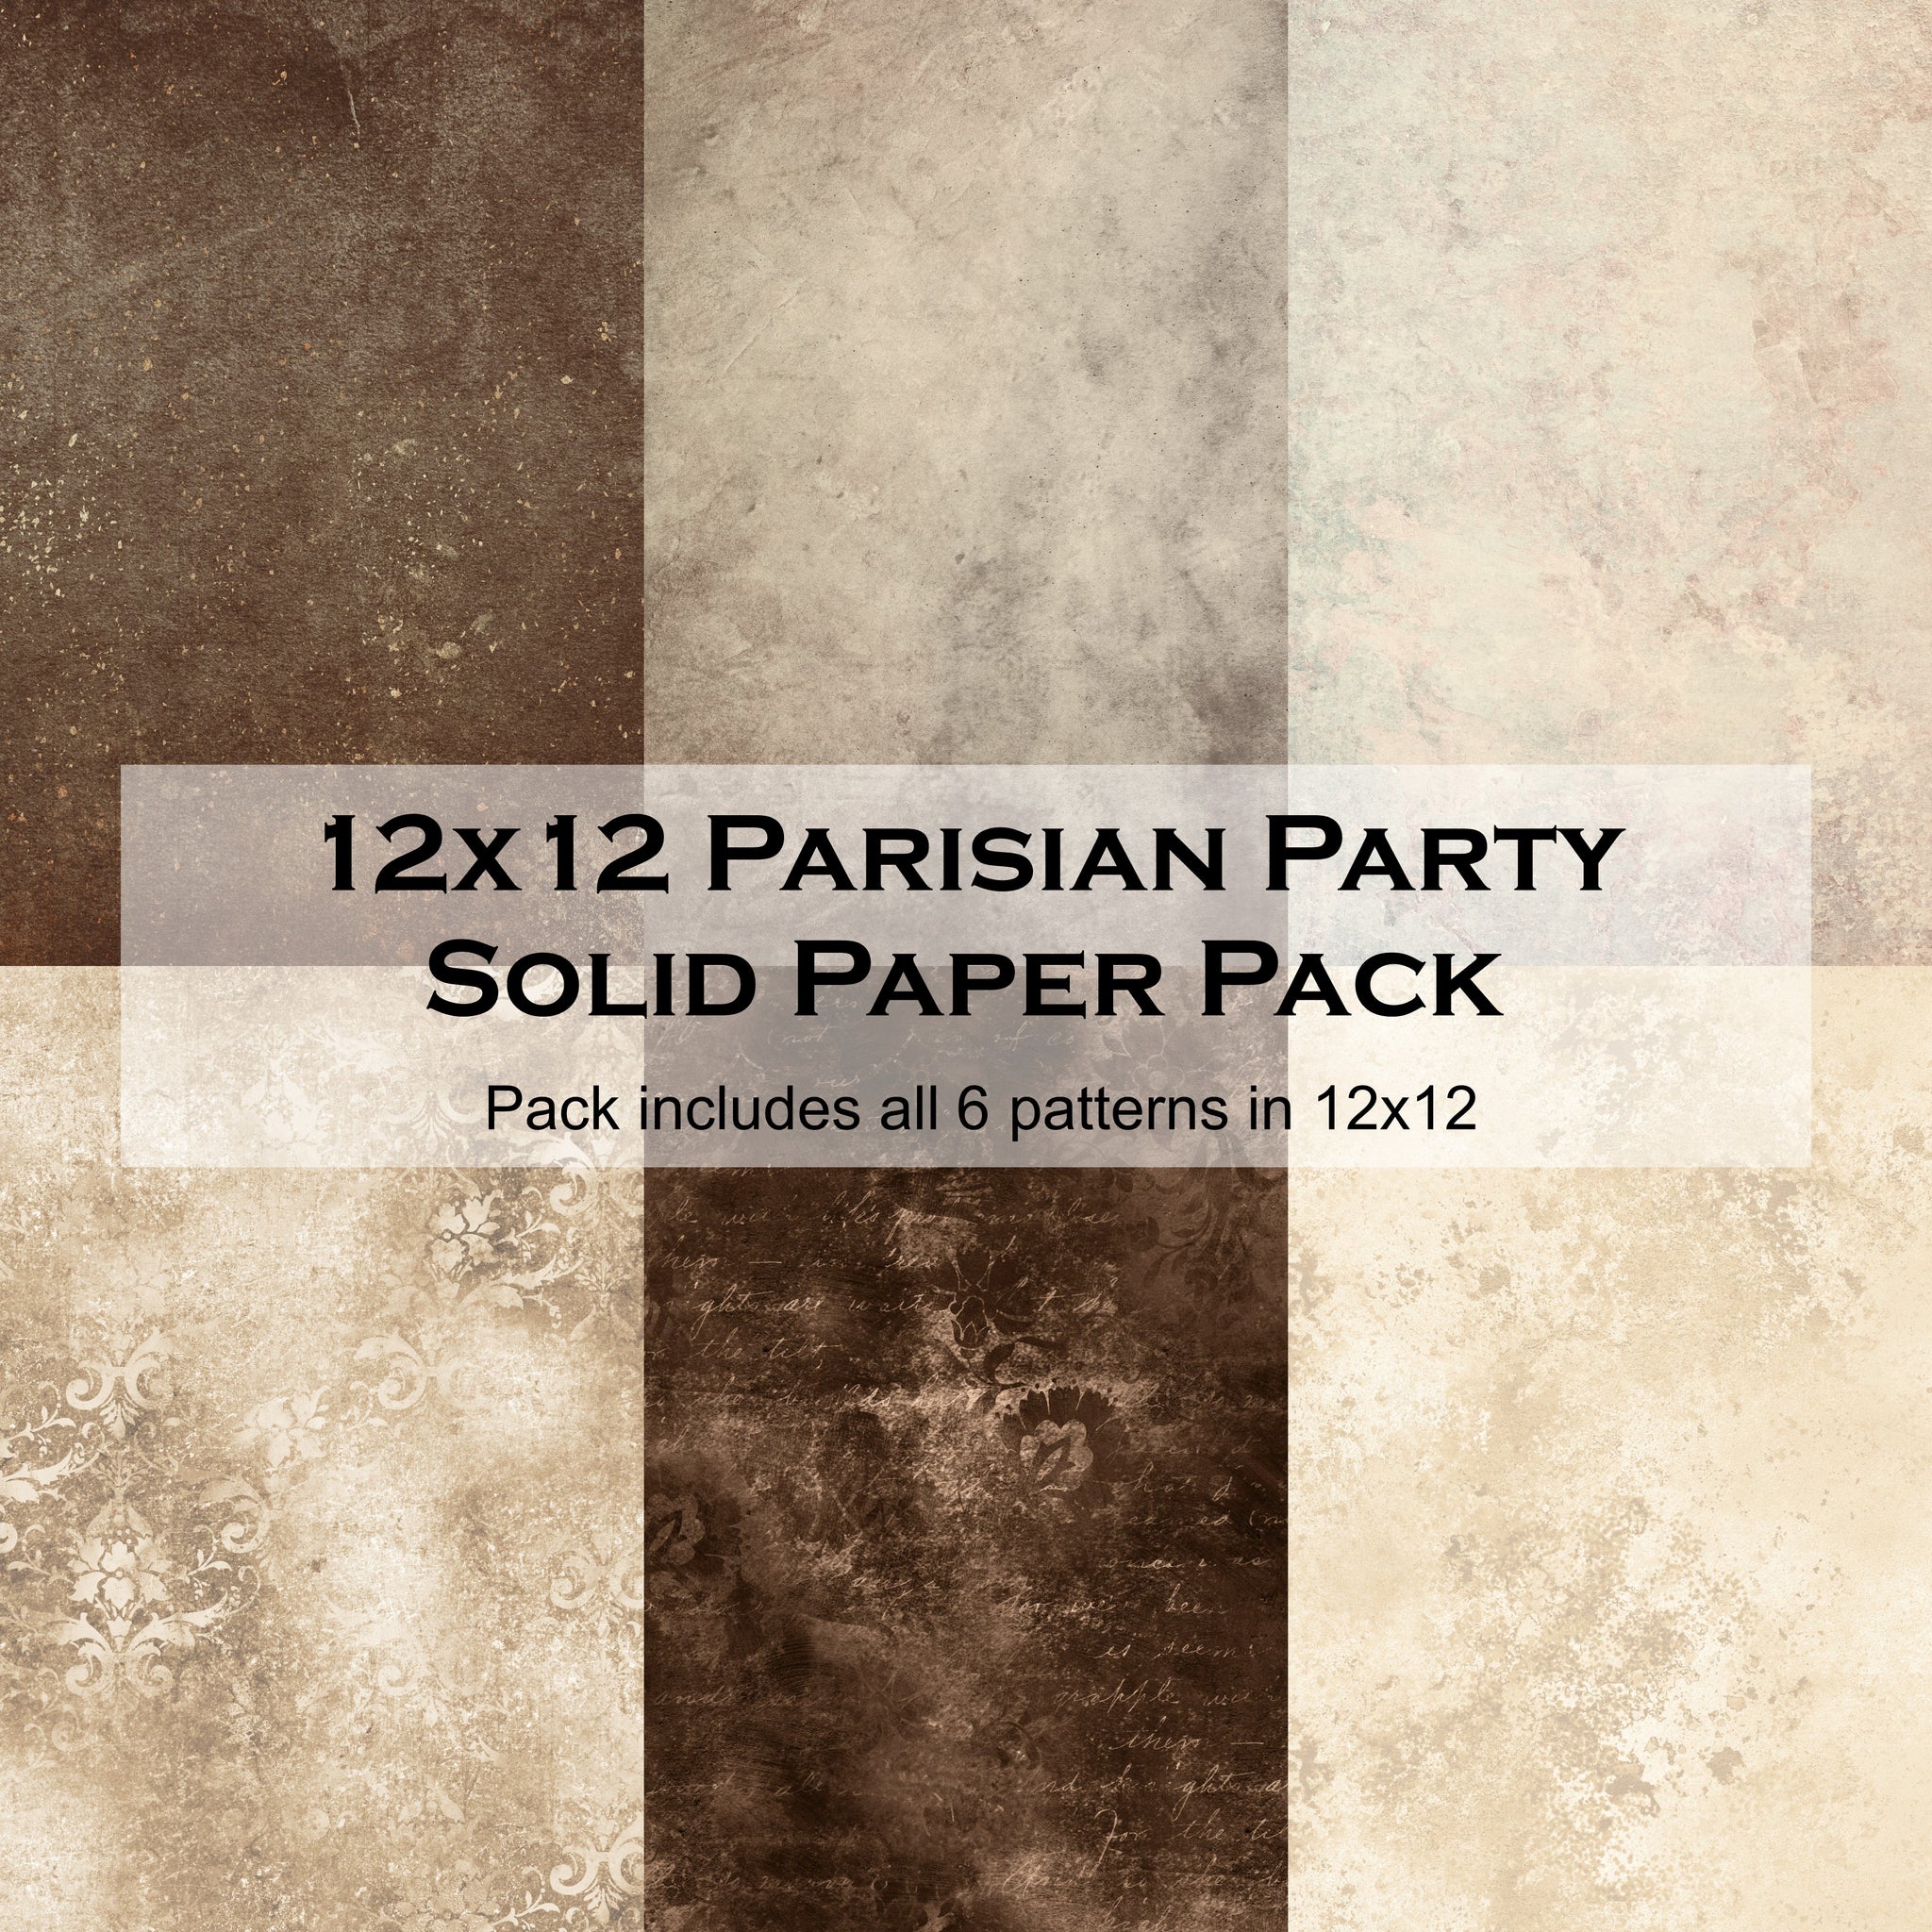 Parisian Party 12x12 Solid Paper Pack